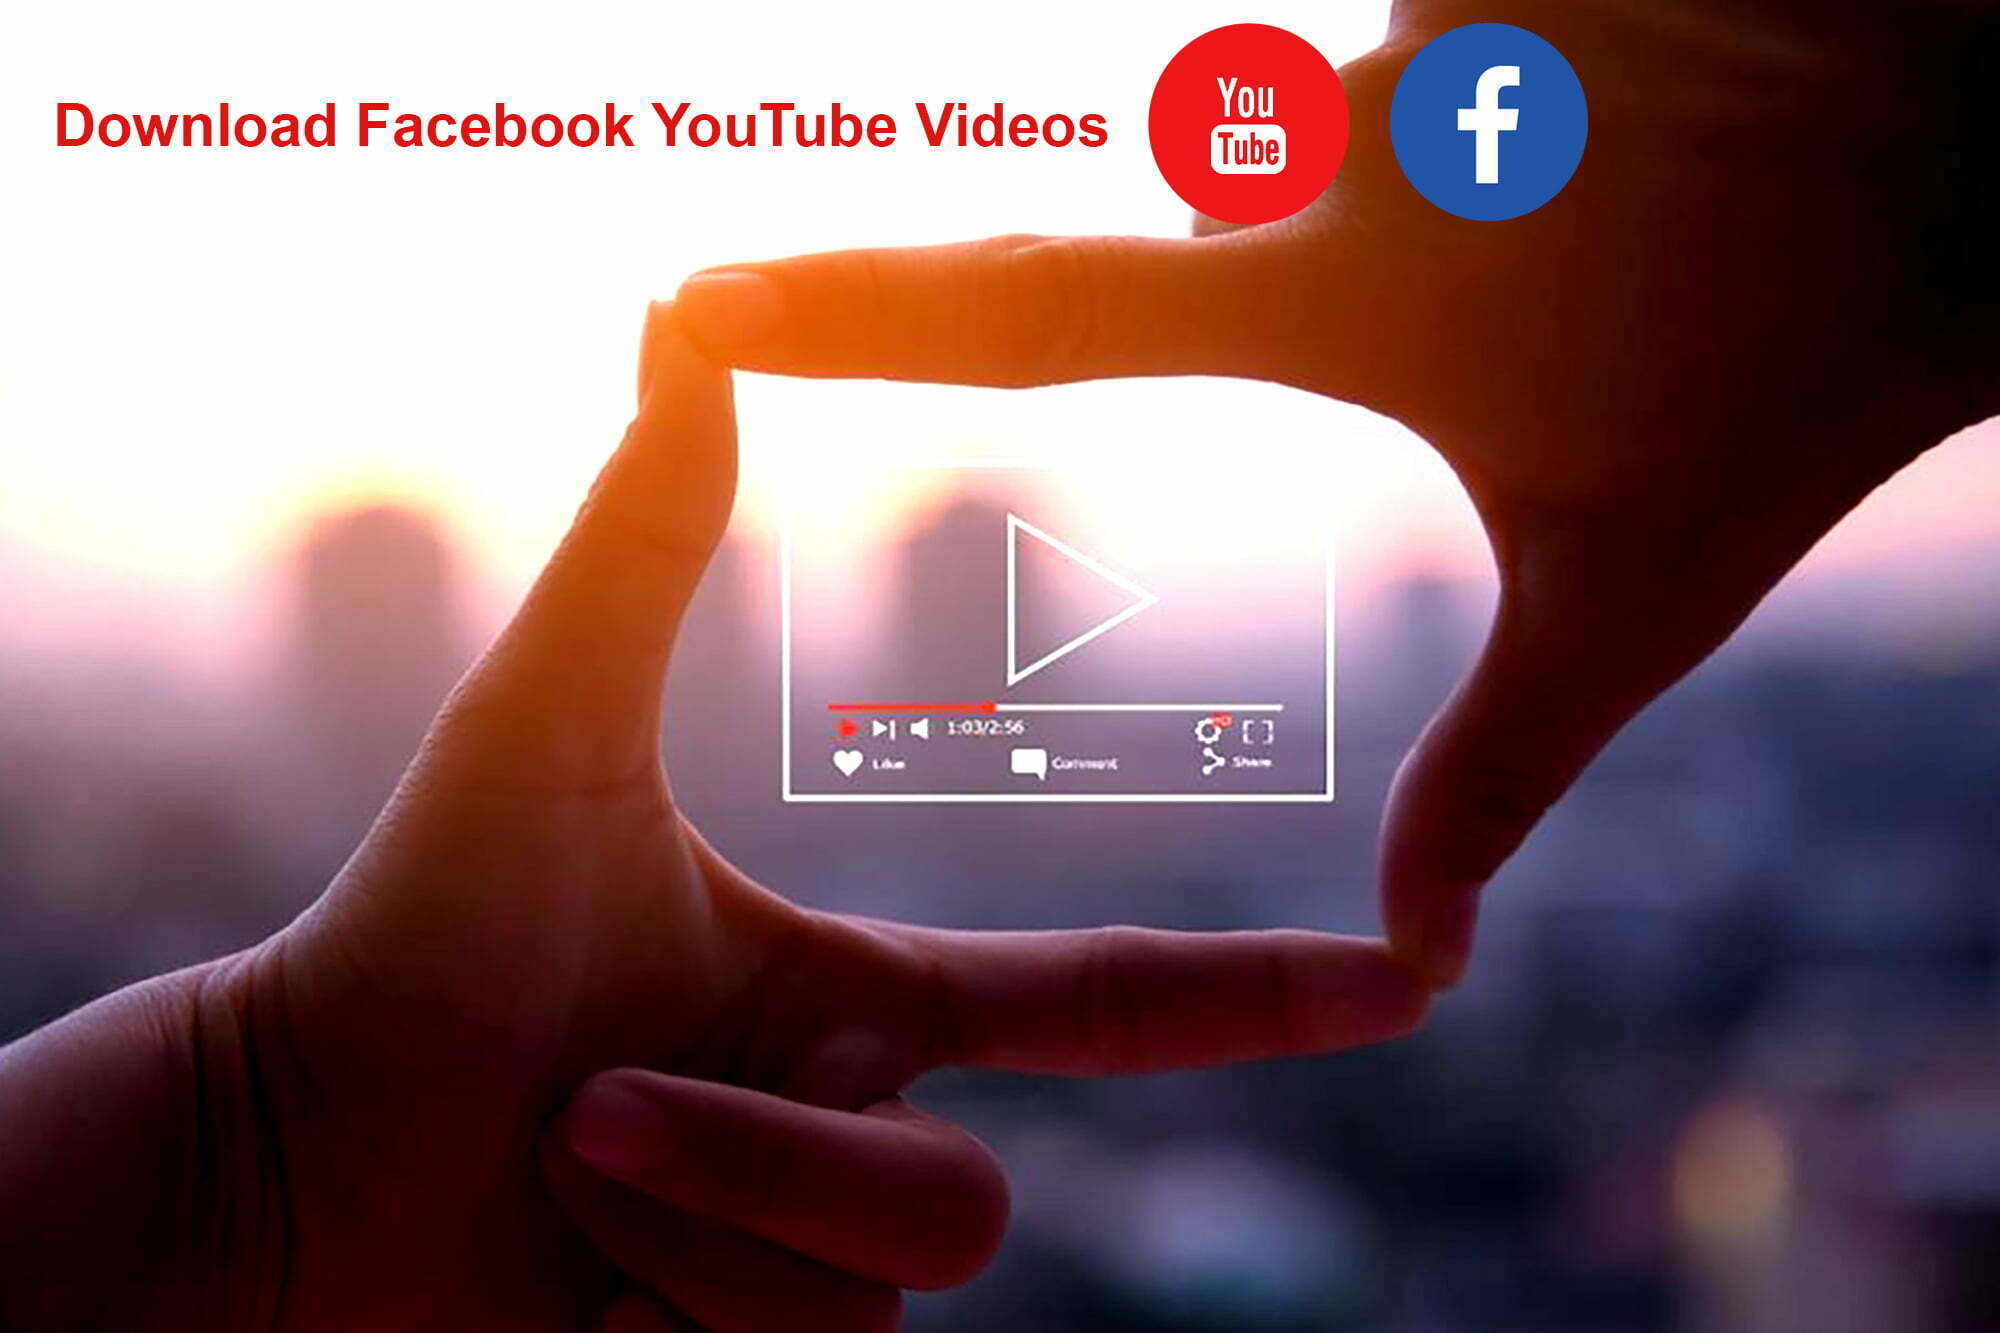 How to Download Facebook YouTube Videos on Your Android Phone